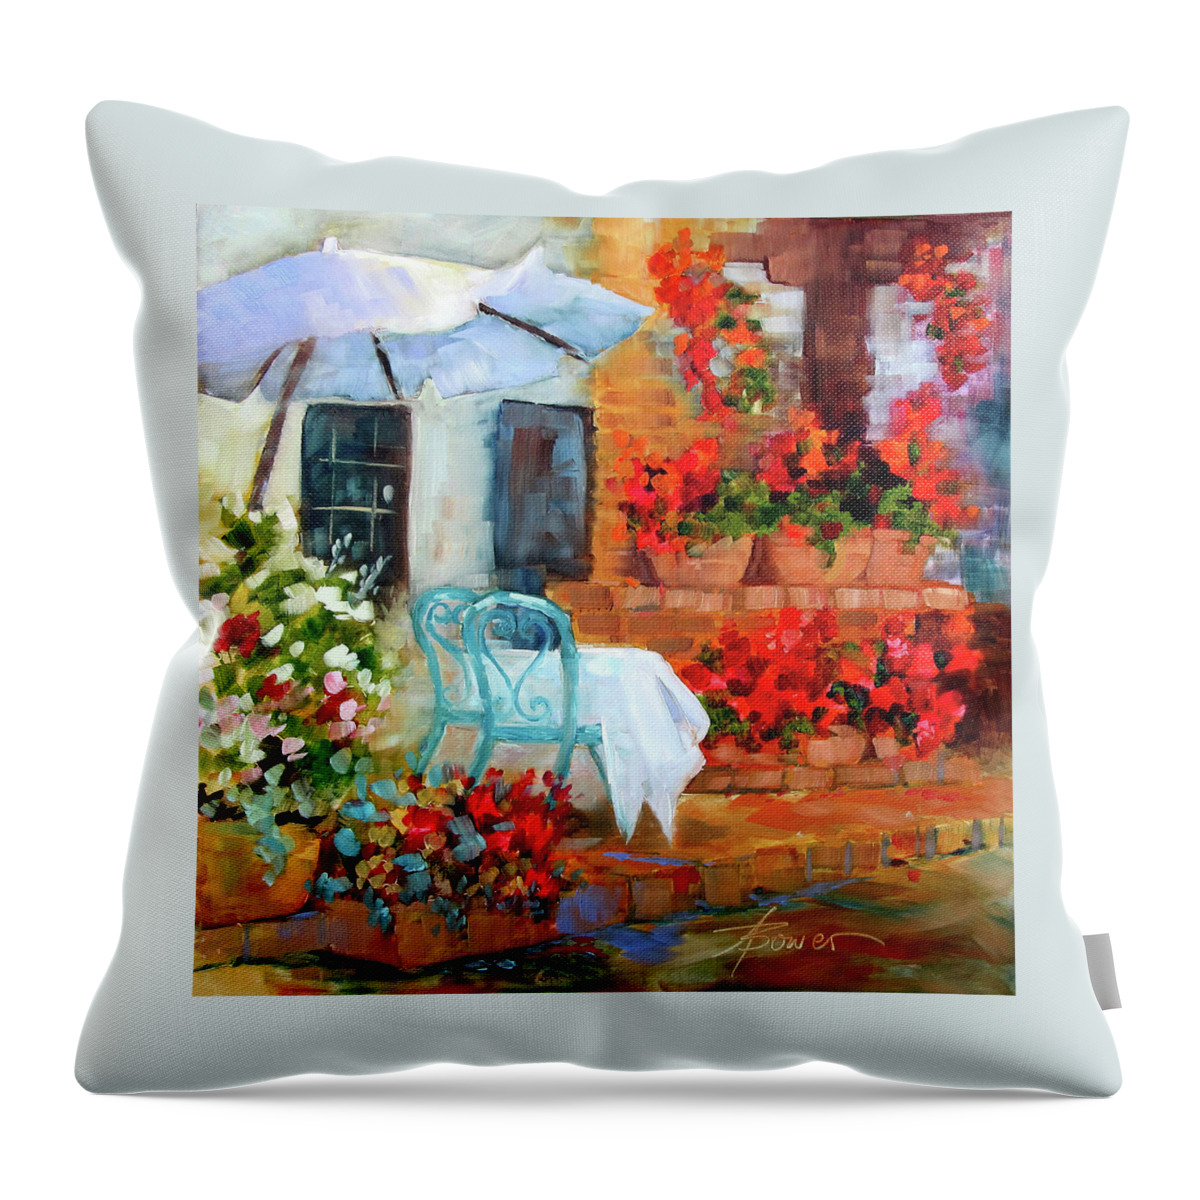 Tuscan Cafe Throw Pillow featuring the painting Sunny With A Light Breeze by Adele Bower